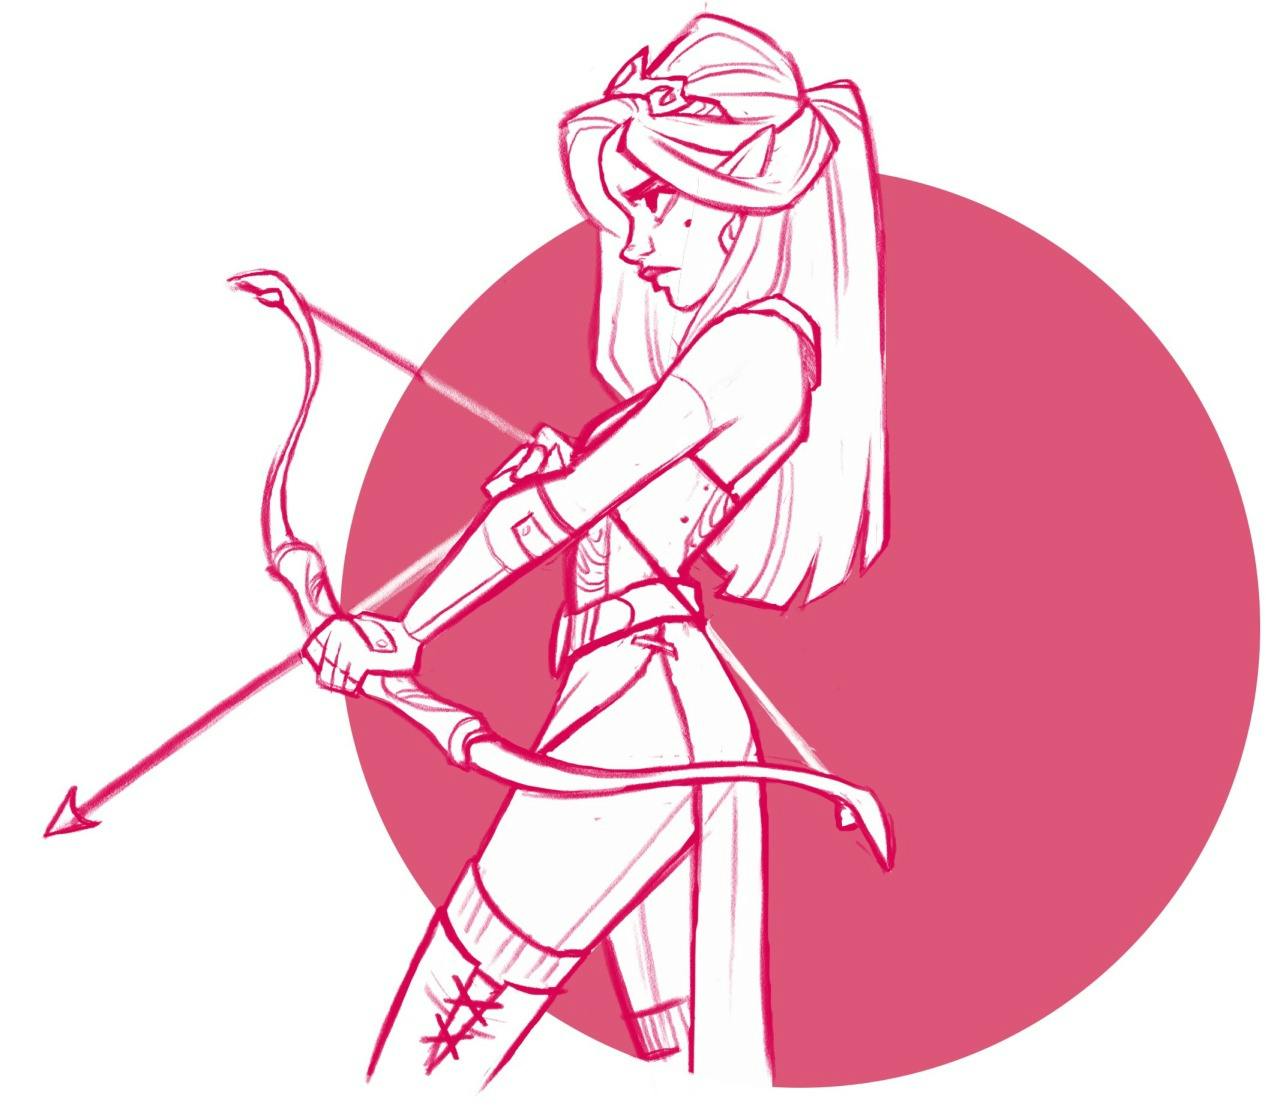 An illustration of a woman holding a bow and arrow